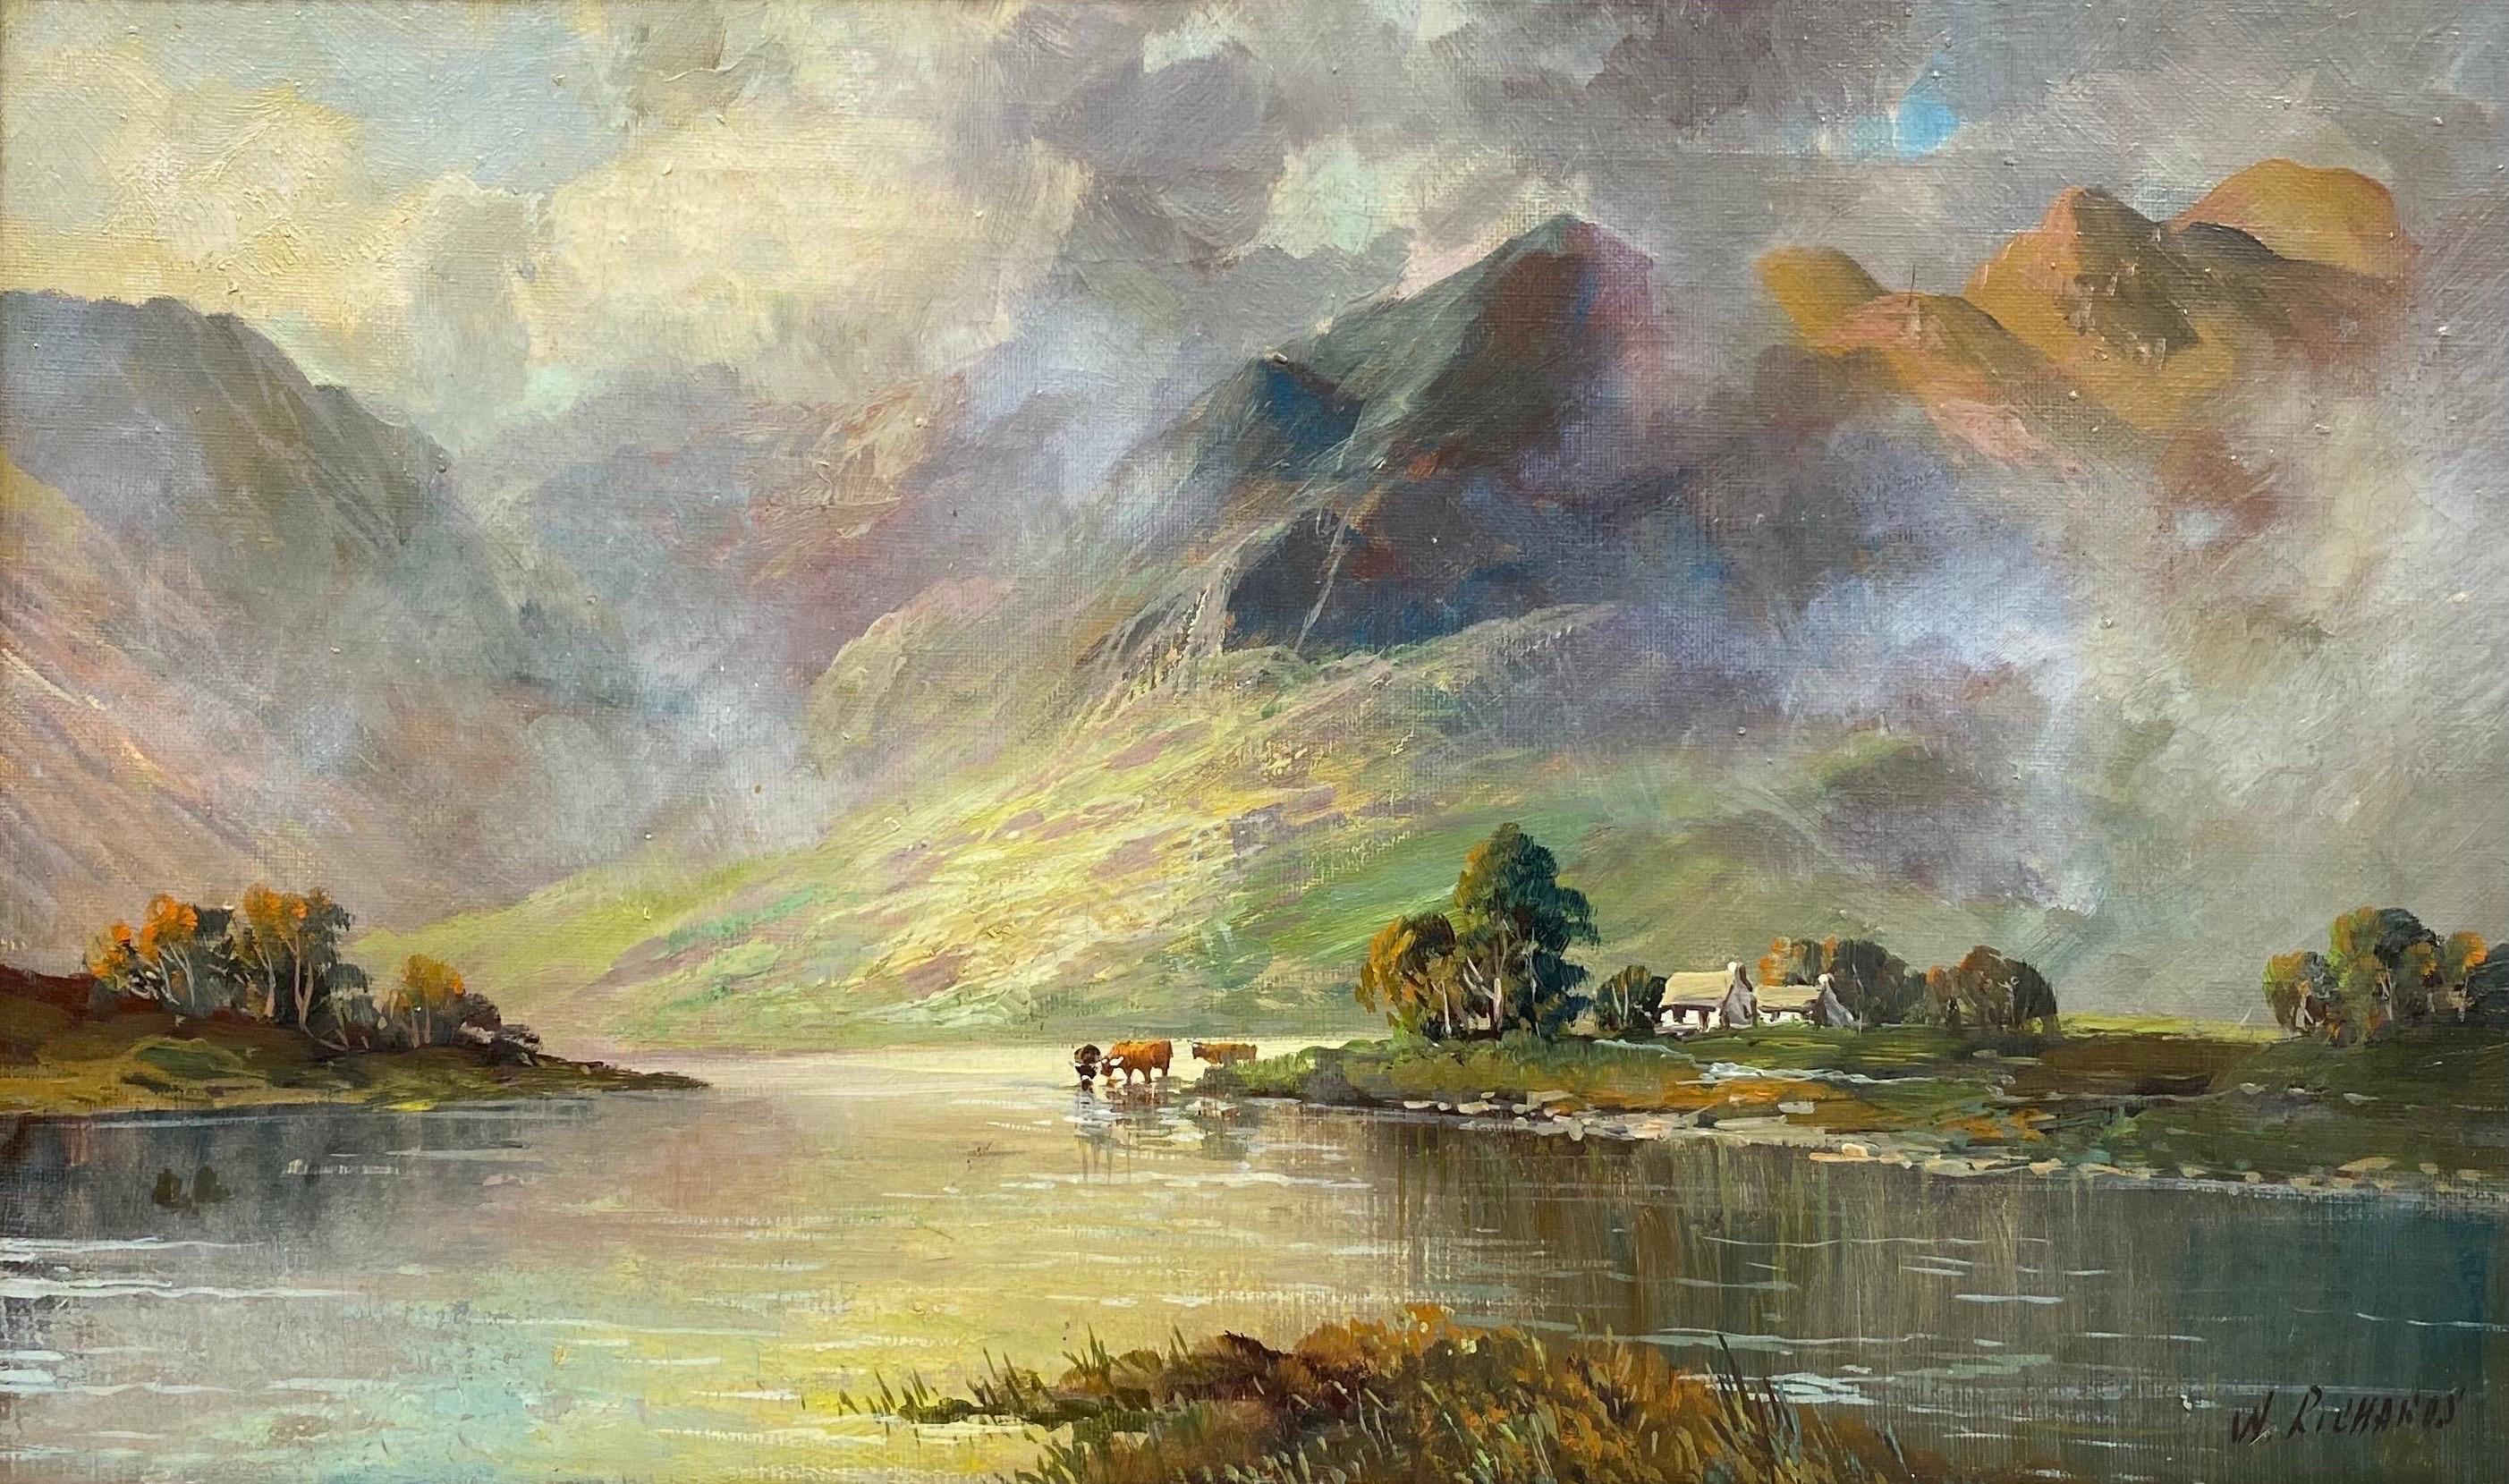 Francis E. Jamieson Figurative Painting - Antique Scottish Highlands Oil Painting Glen Shiel Cattle Watering Loch